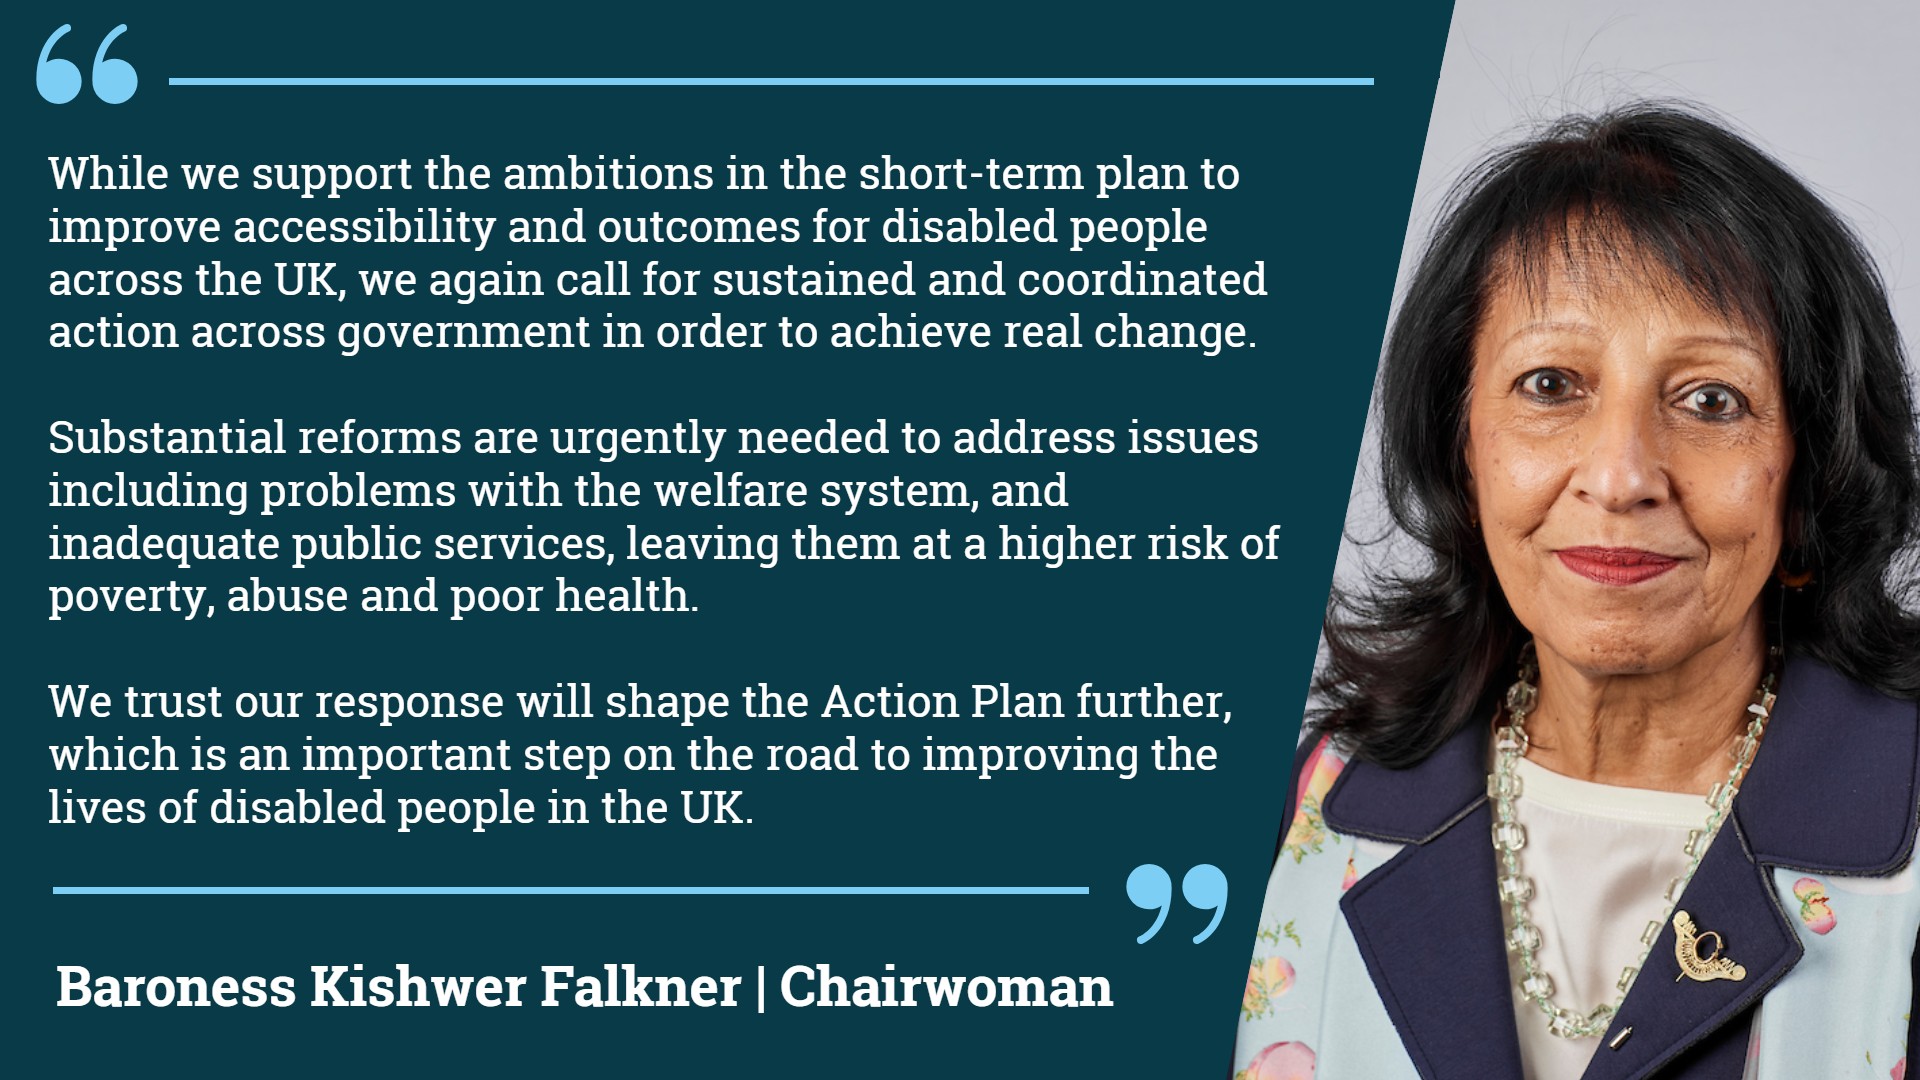 Statement from EHRC Chairwoman Baroness Kishwer Falkner, "Menopause symptoms can significantly affect someone's ability to work. Employers have a responsibility to support employees going through the menopause - it is to their benefit to do so, and the benefit of the wider workforce. Every employer should take note of this hearing. I am pleased we can support Ms Rooney with her case which she has been fighting for several years now. As Britain's equality regulator, we will continue to intervene in cases such as this and hold employers to account by using our unique powers".